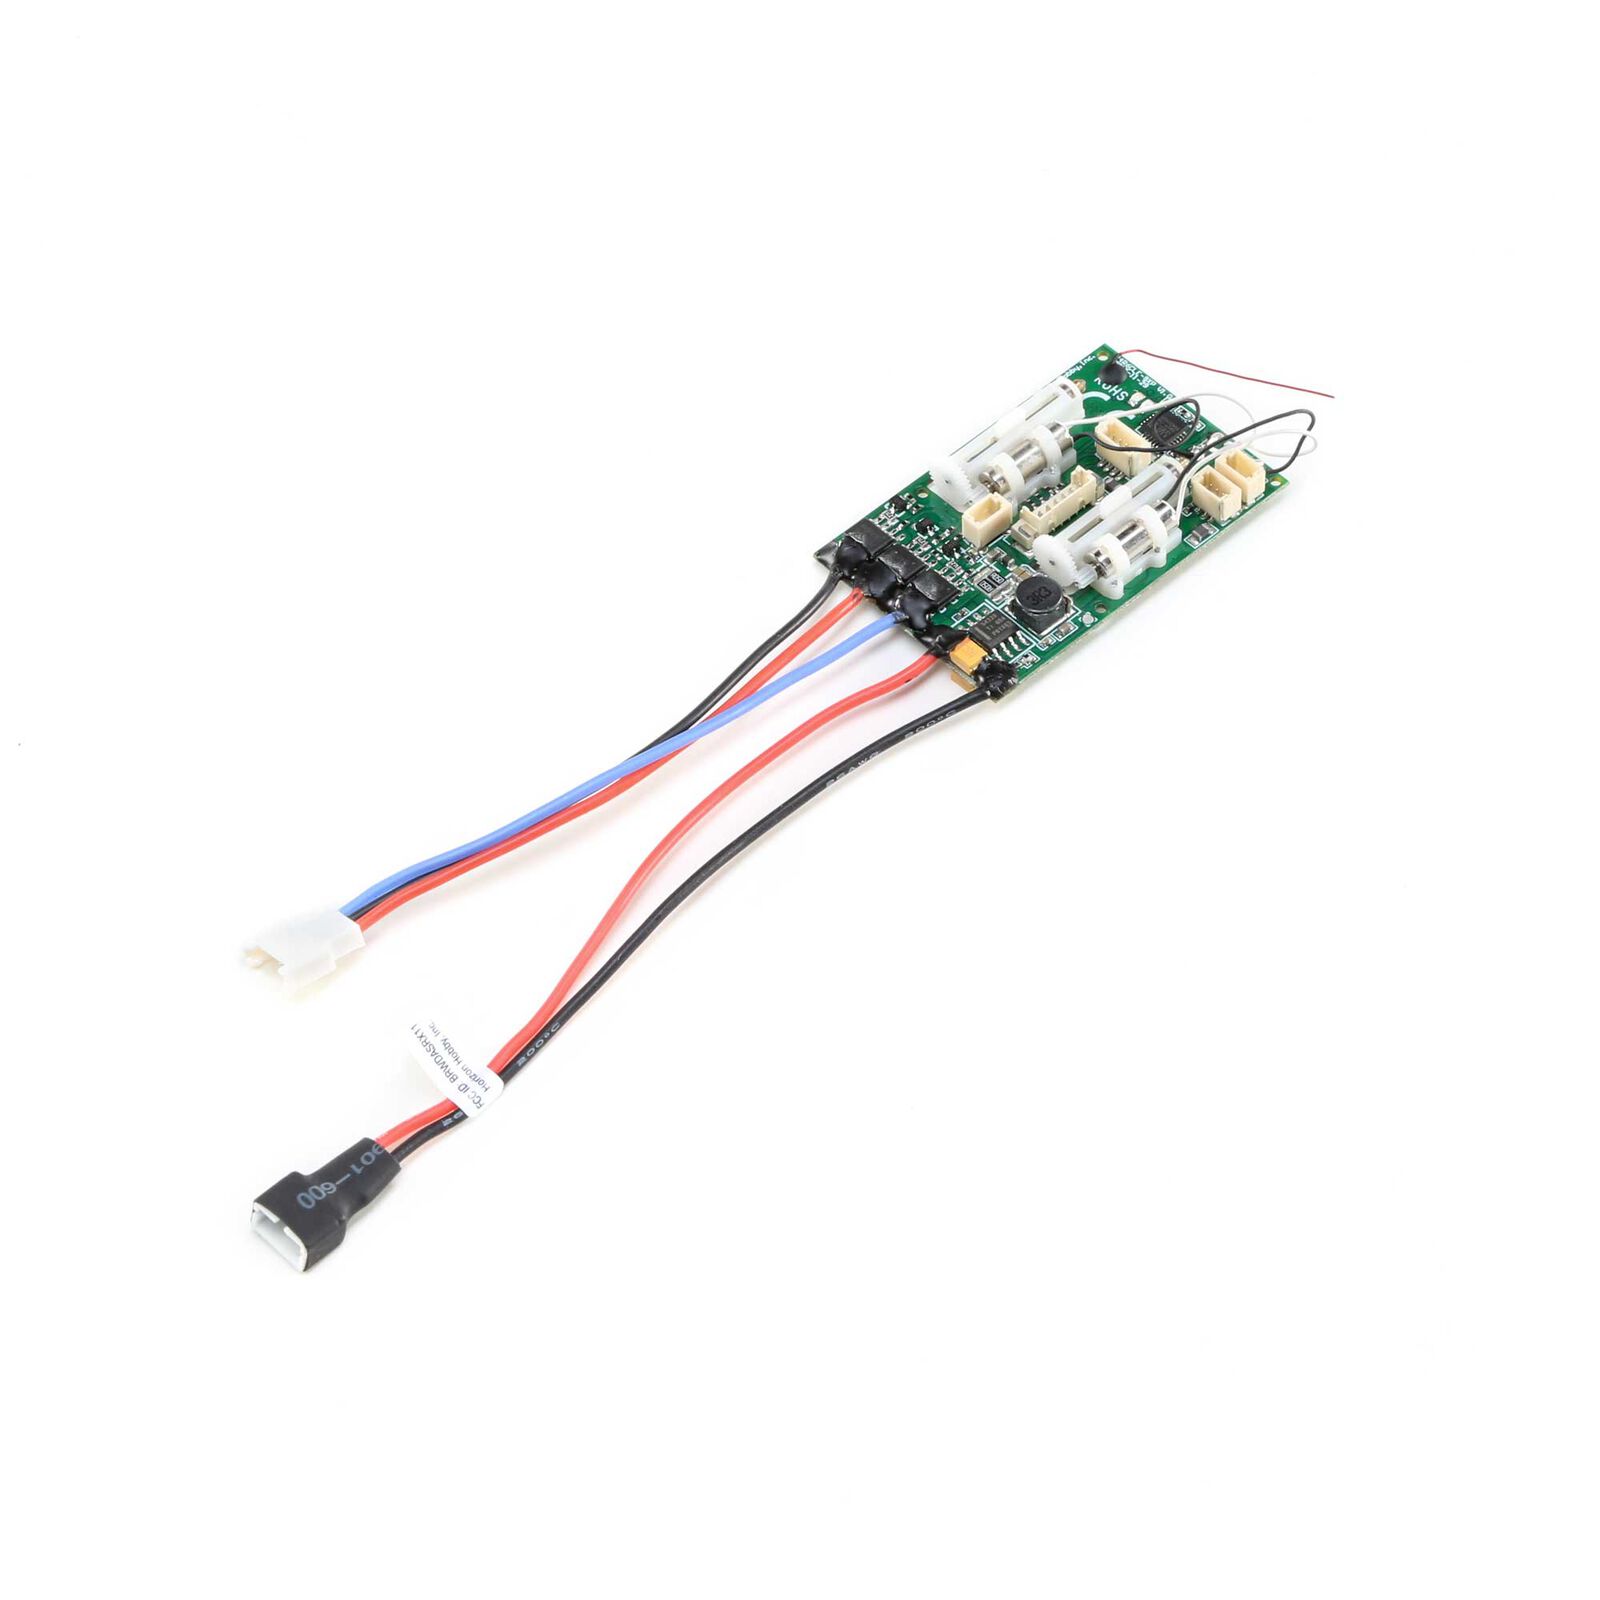 DSMX Receiver / Brushless ESC Unit with AS3X & SAFE: UMX Timber, Cirrus